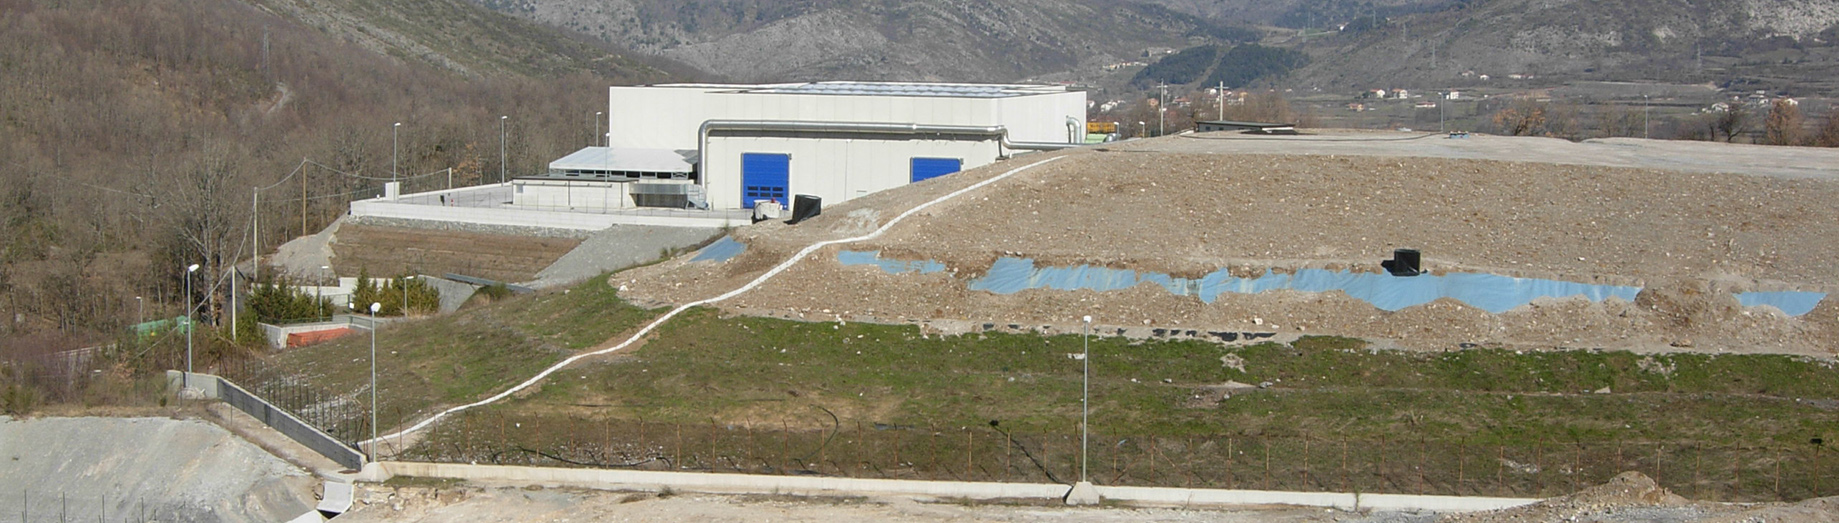 Construction of a Solid Waste Treatment Plant and Landfill